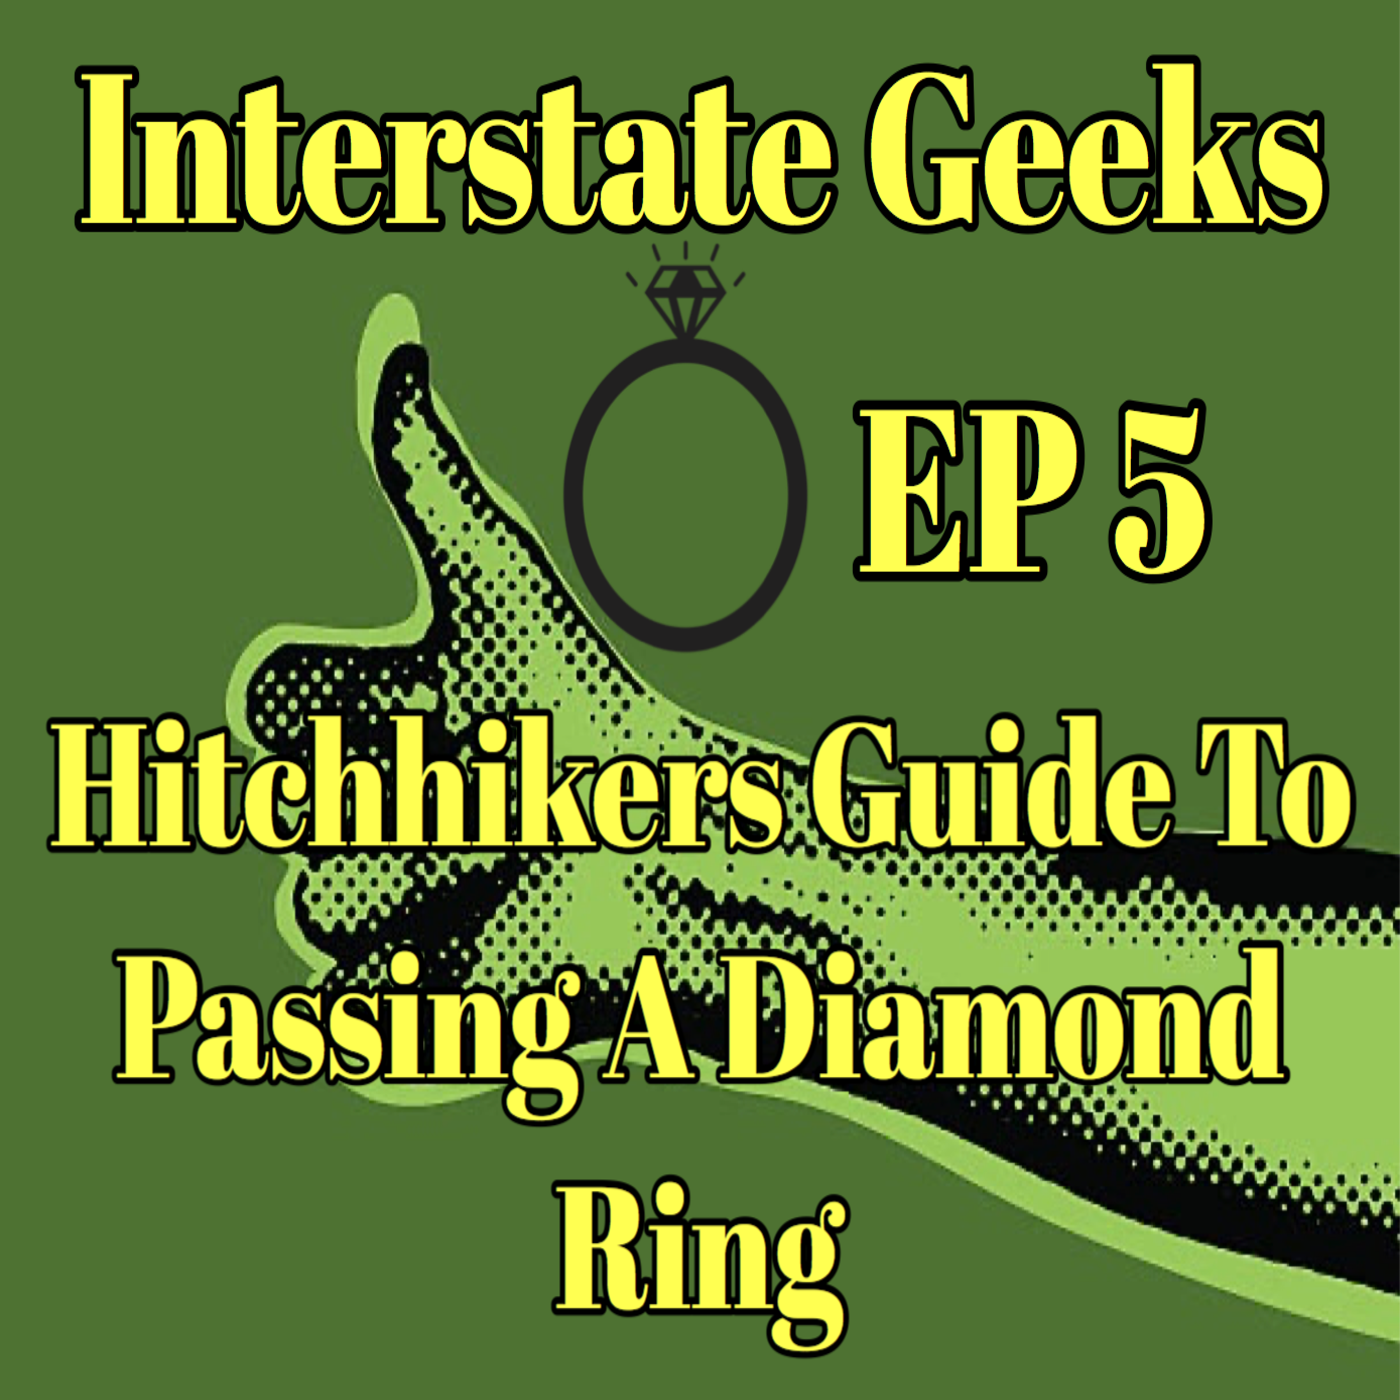 Hitchhikers Guide To Passing A Diamond Ring